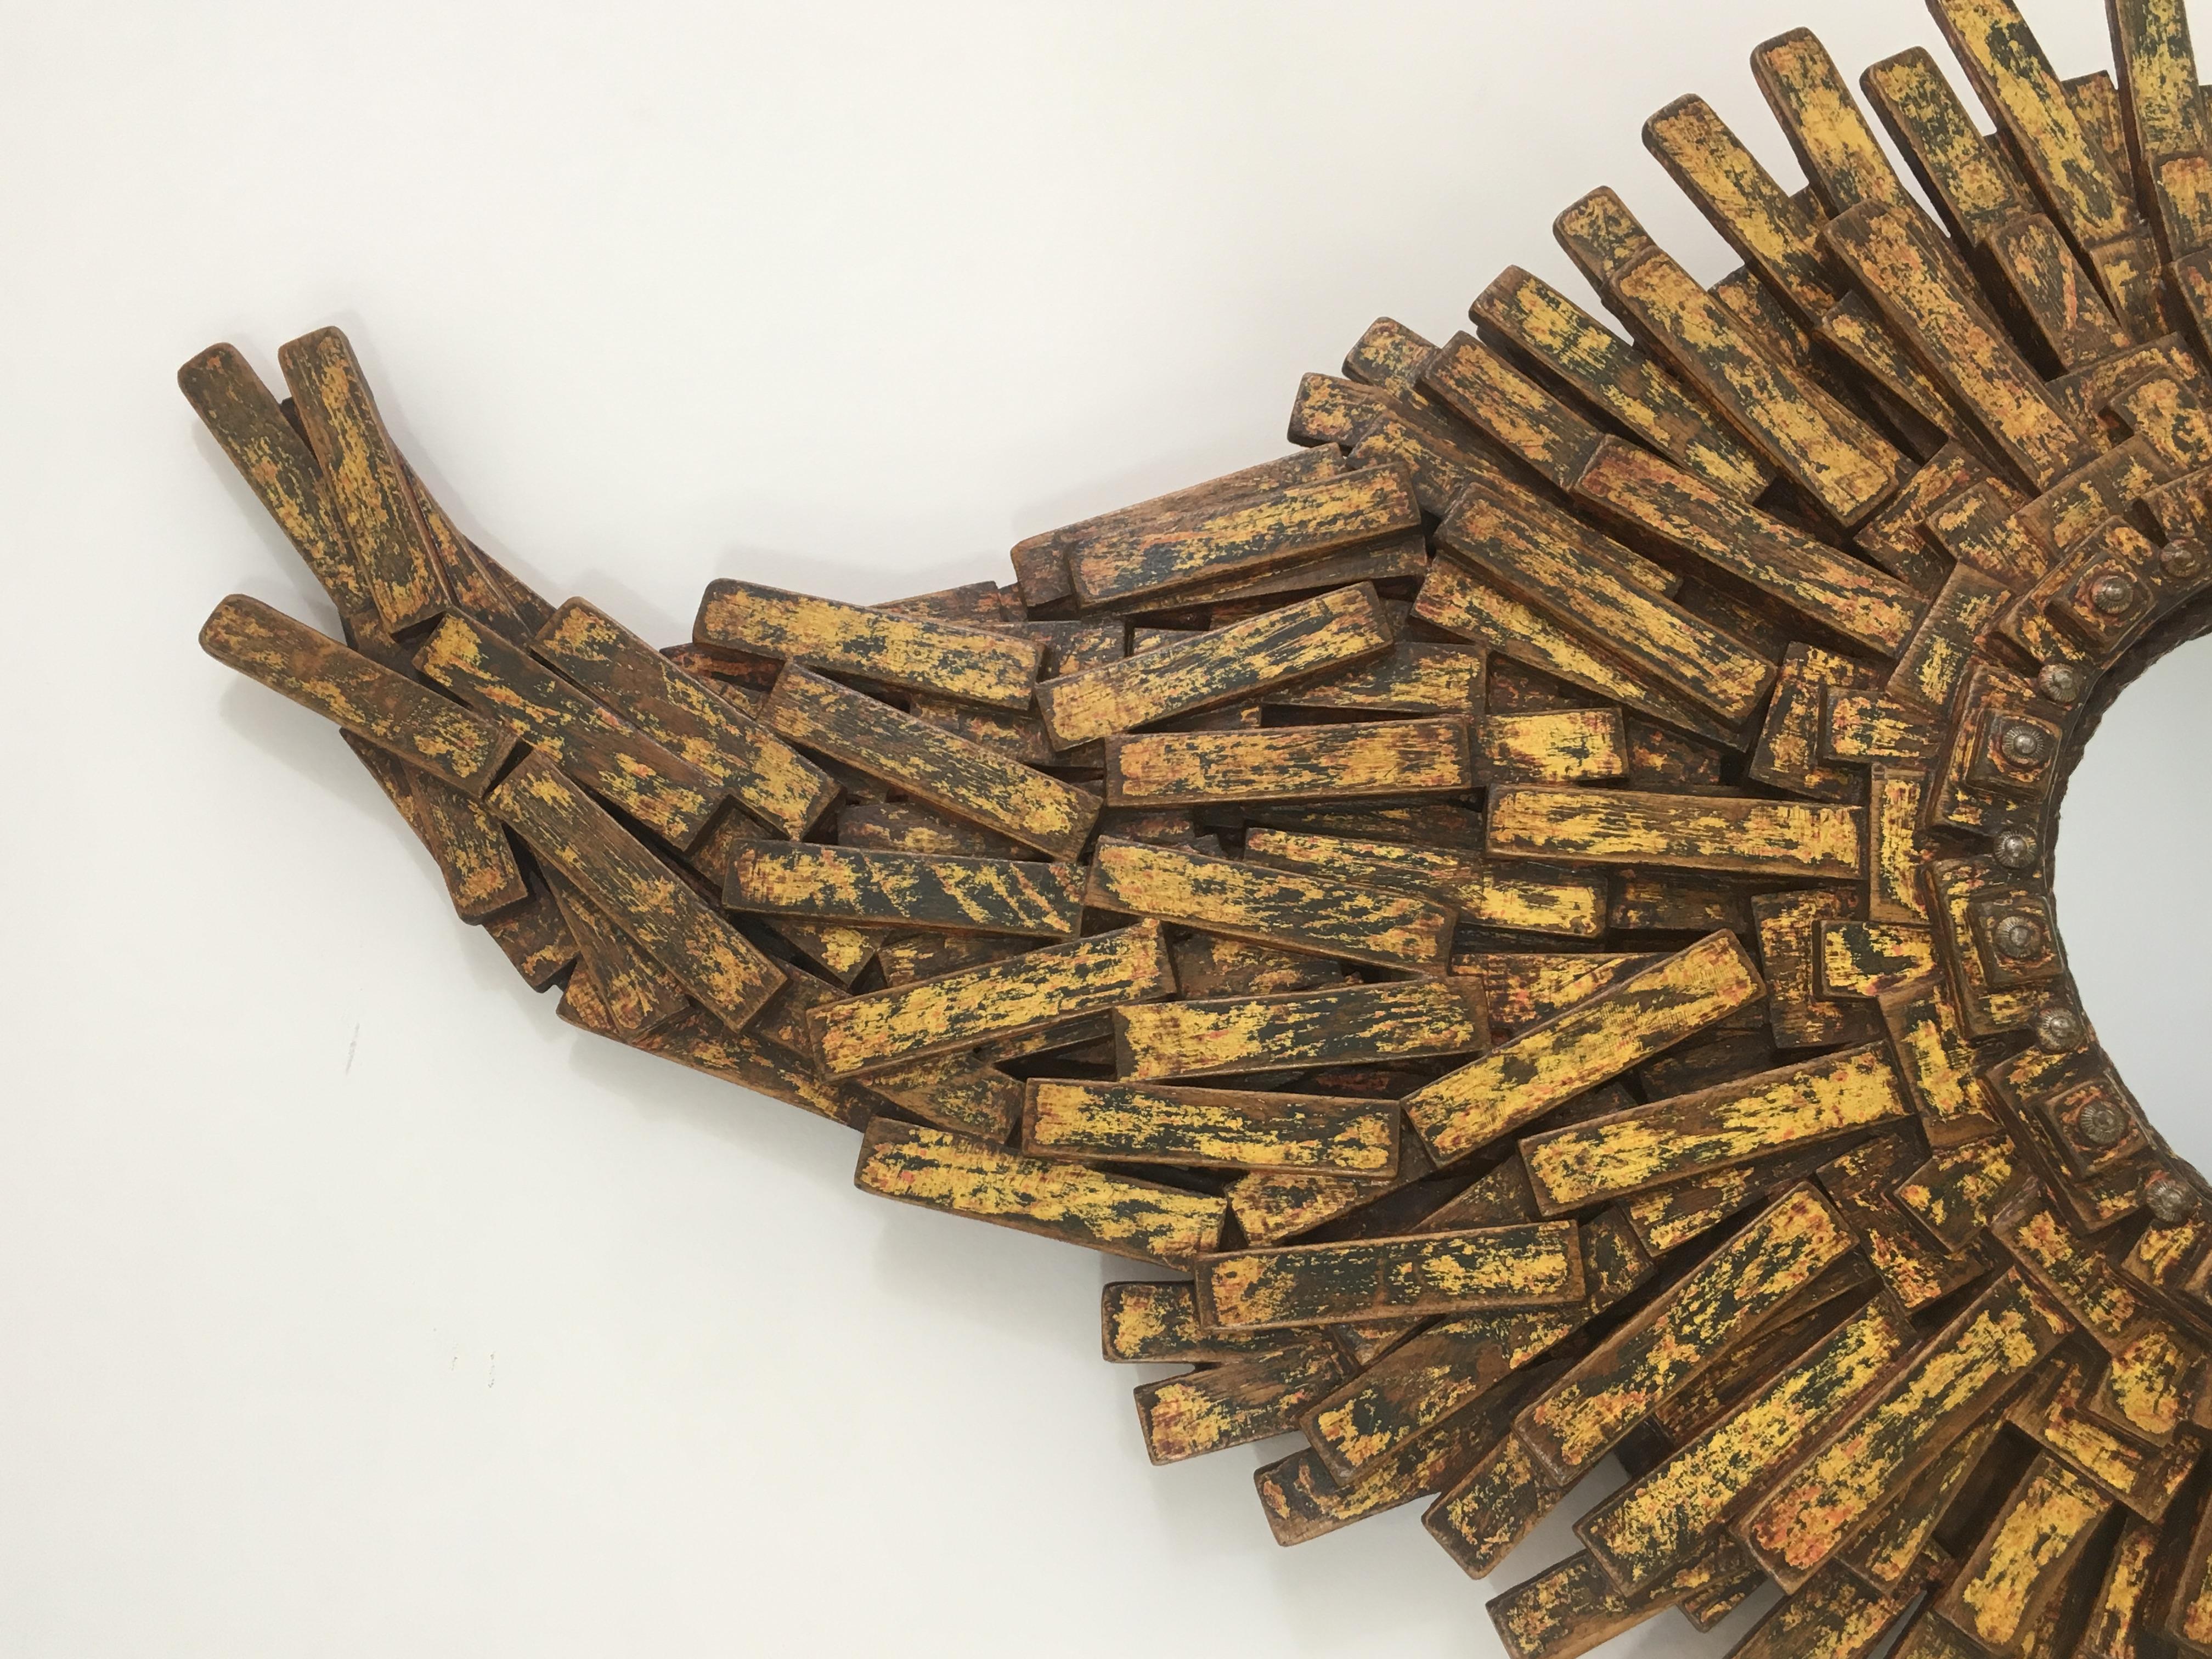 This unique amazing Brutalist mirror is made of painted wood, rope & old iron nails. This is a fantastic work of art made of hundreds of oak pieces representing a large sunburst mirror with a flame on top of it. The quality of this creation is